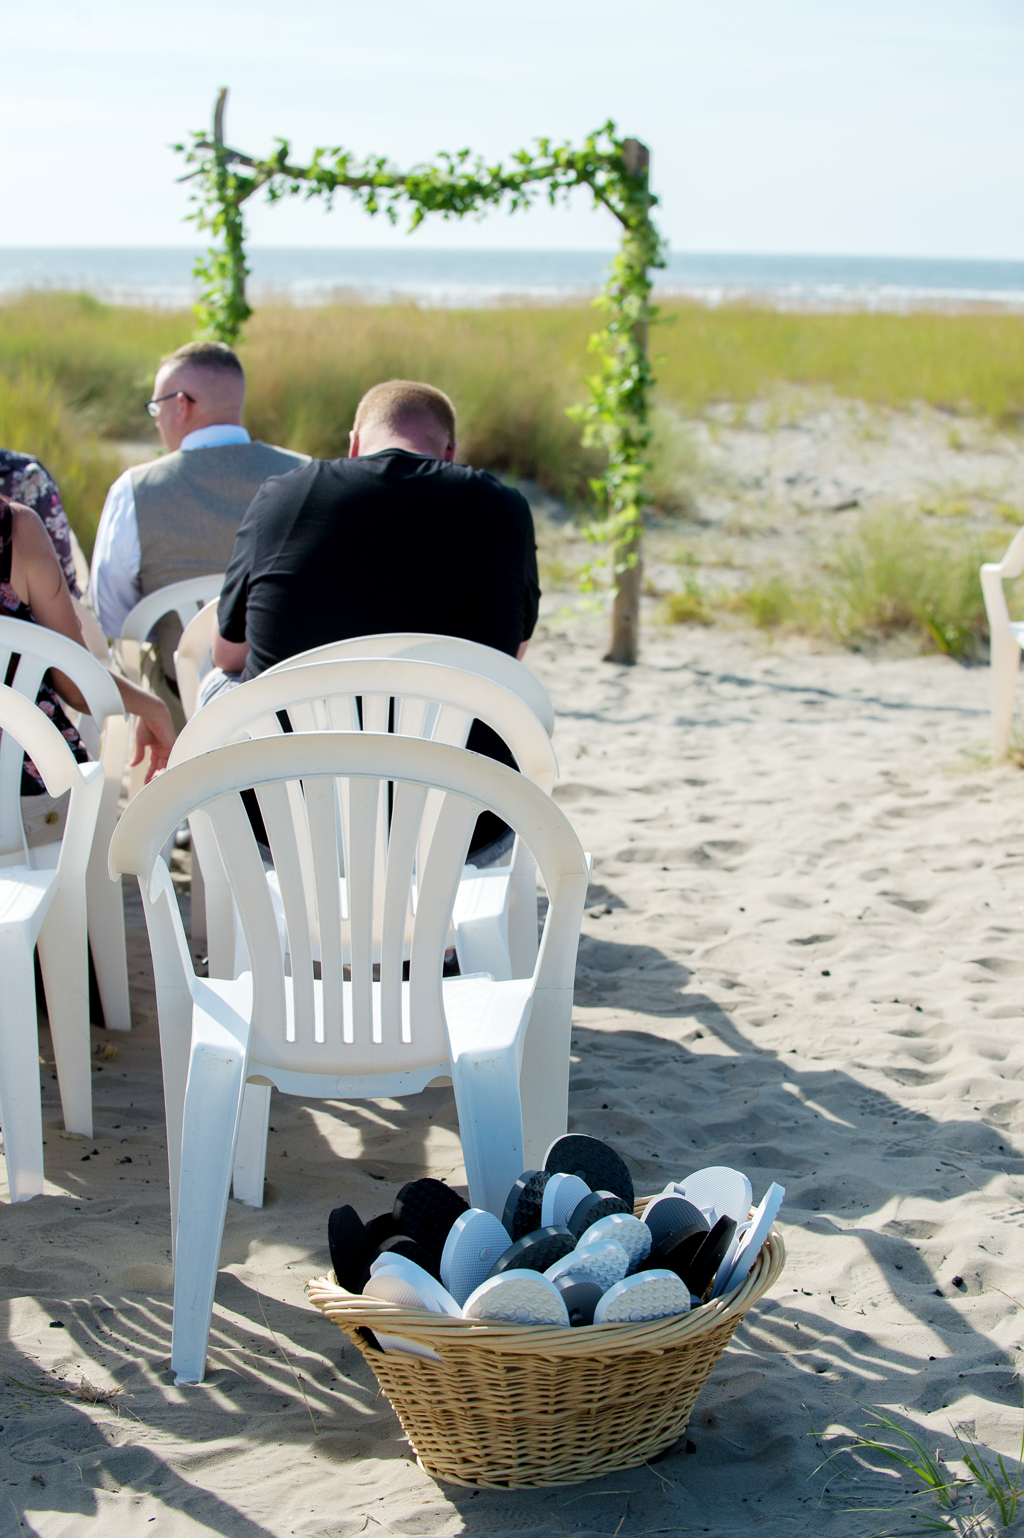 a basket of flip-flops for guests to wear at beach wedding